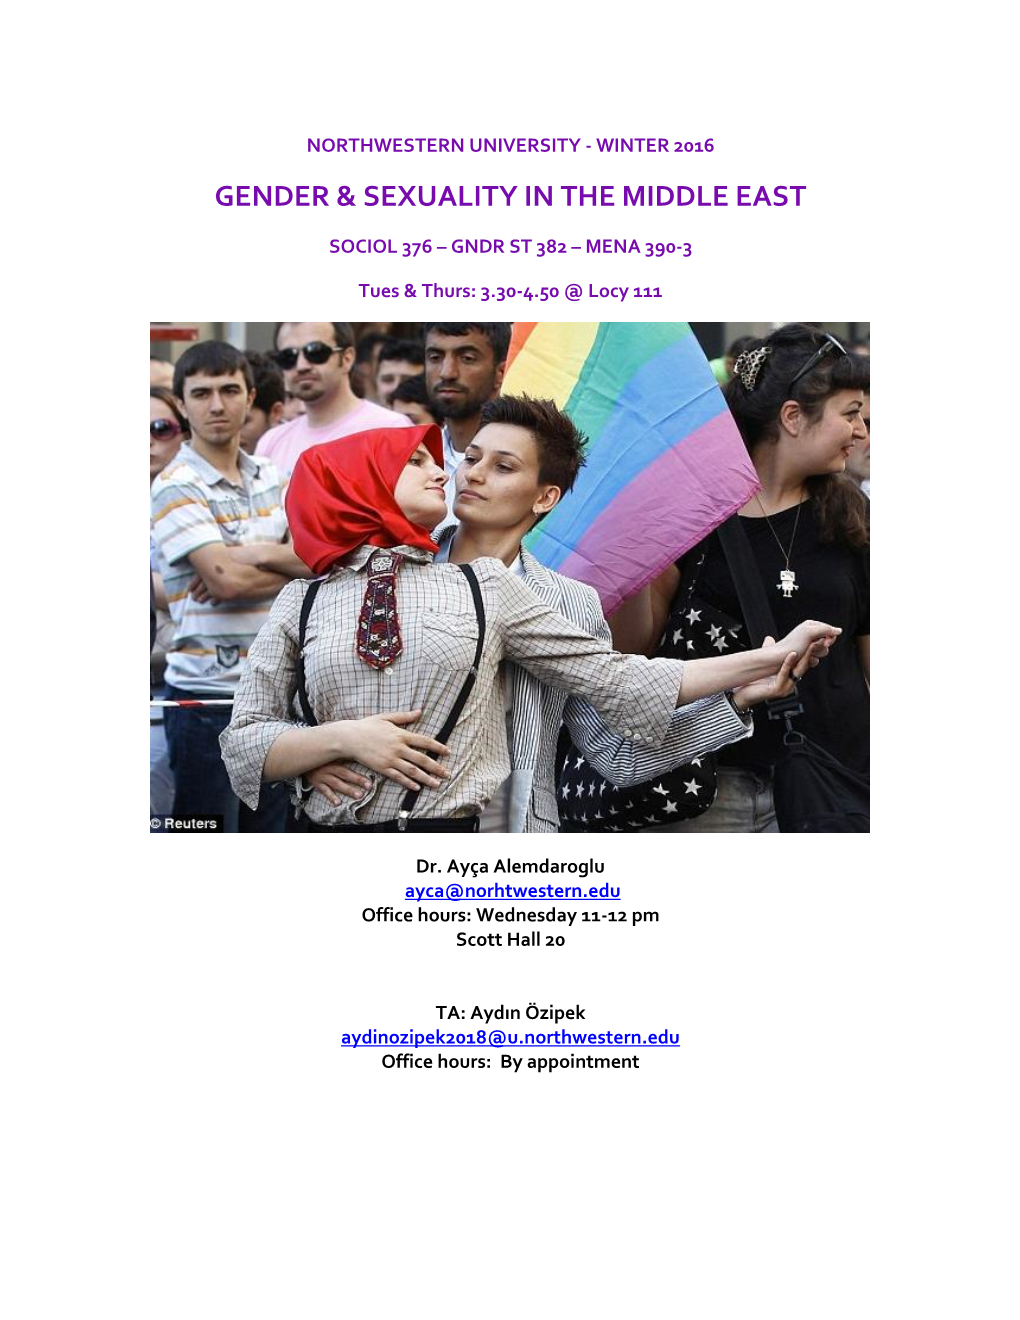 Gender & Sexuality in the Middle East